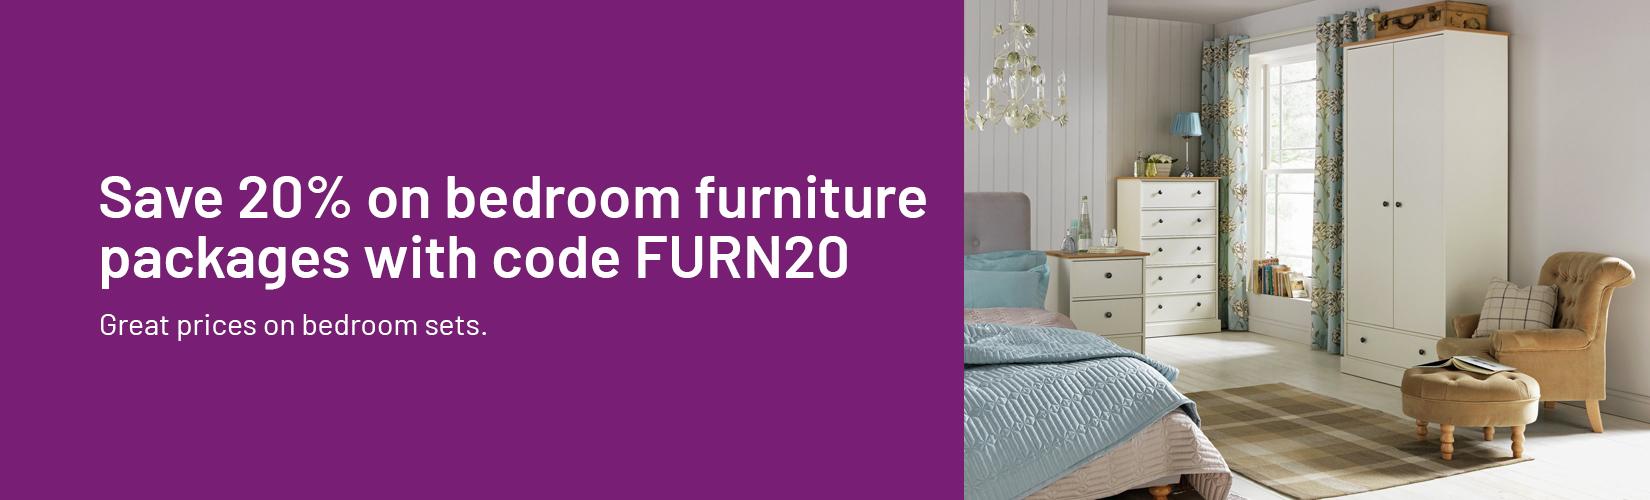 Save 20% on bedroom furniture packages with code FURN20.